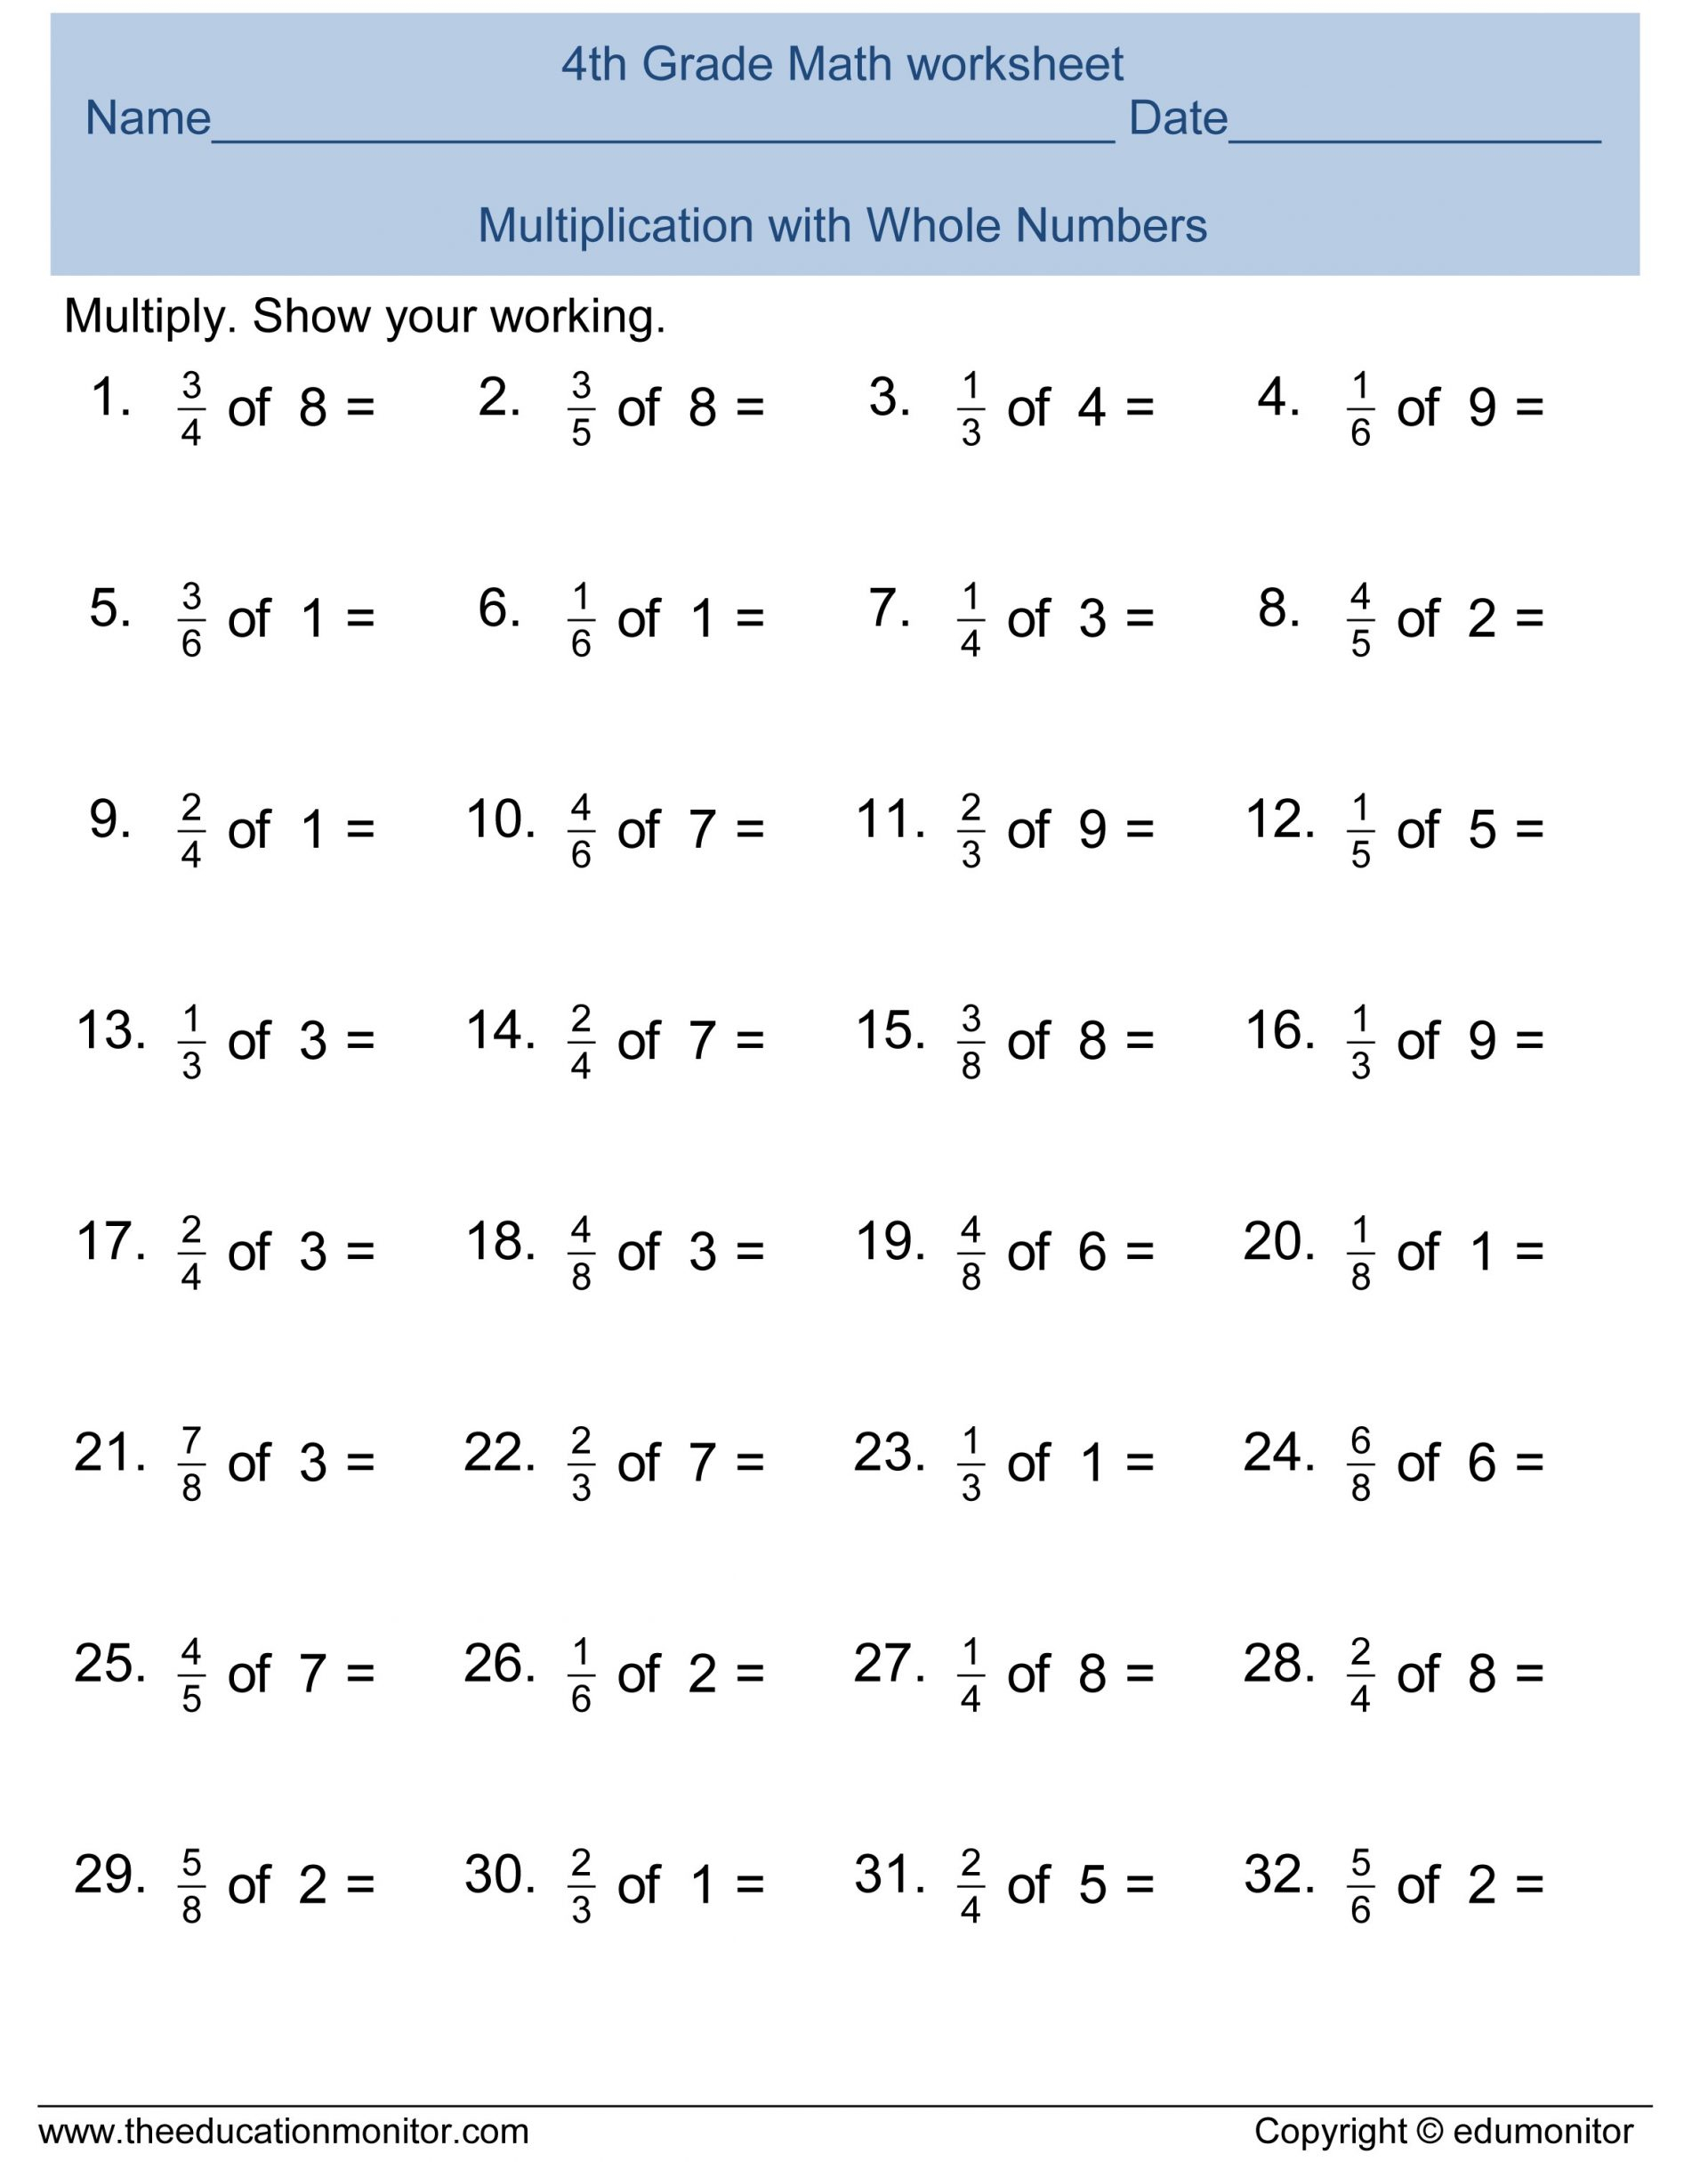 Worksheet Ideas ~ How To Teachon Worksheets Awesome for Free Printable Multiplication Worksheets 7Th Grade